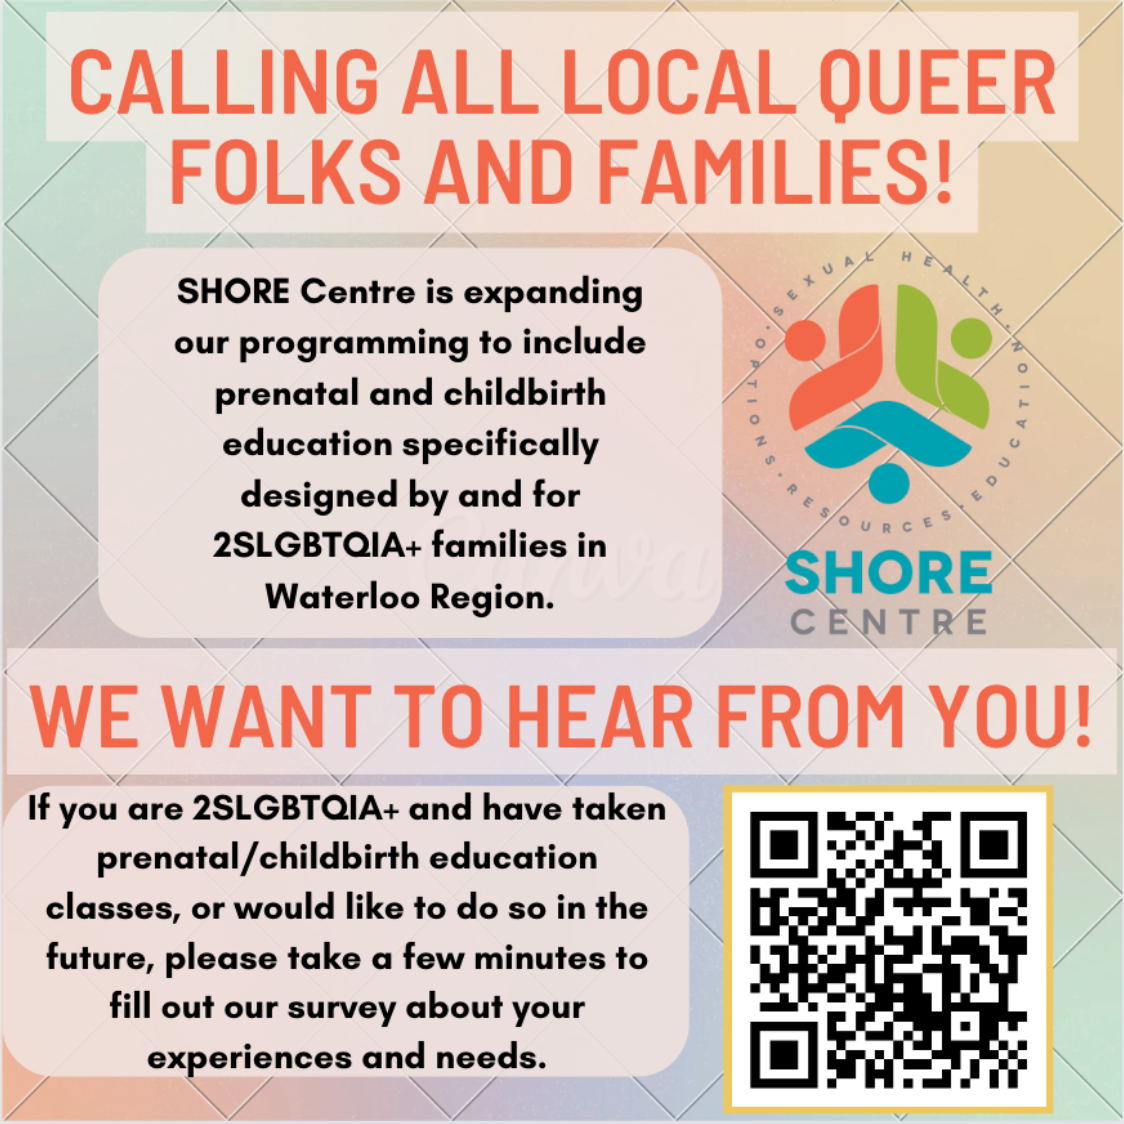 If you are 2SLSBGTQIA+ and have recieved prenatal care or would like to do so in the future, please use the QR code to fill out our survey